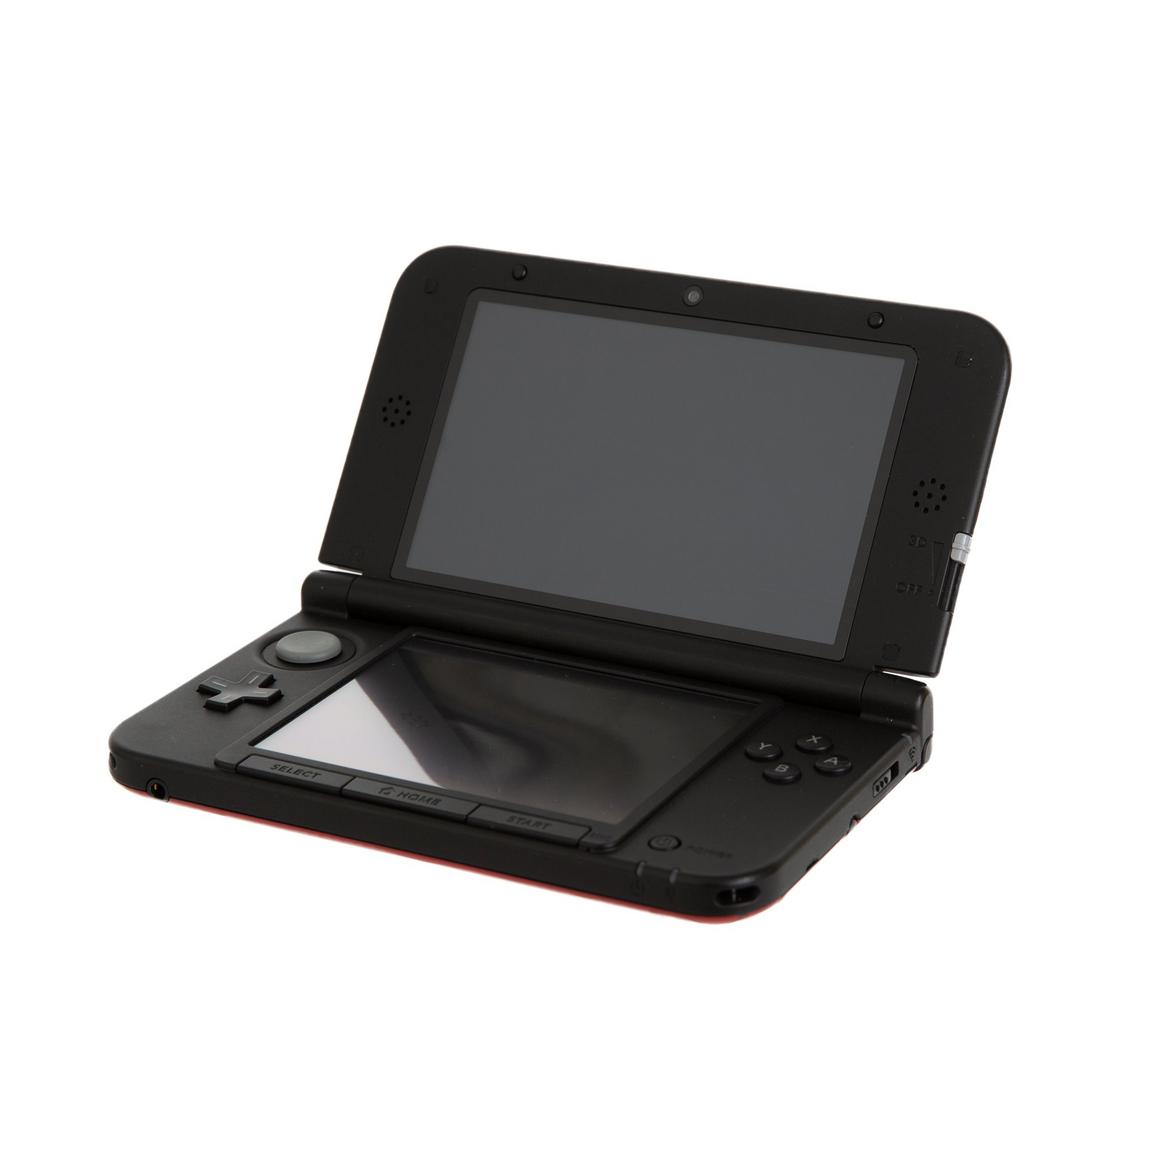 Nintendo 3DS XL Handheld Console - Red